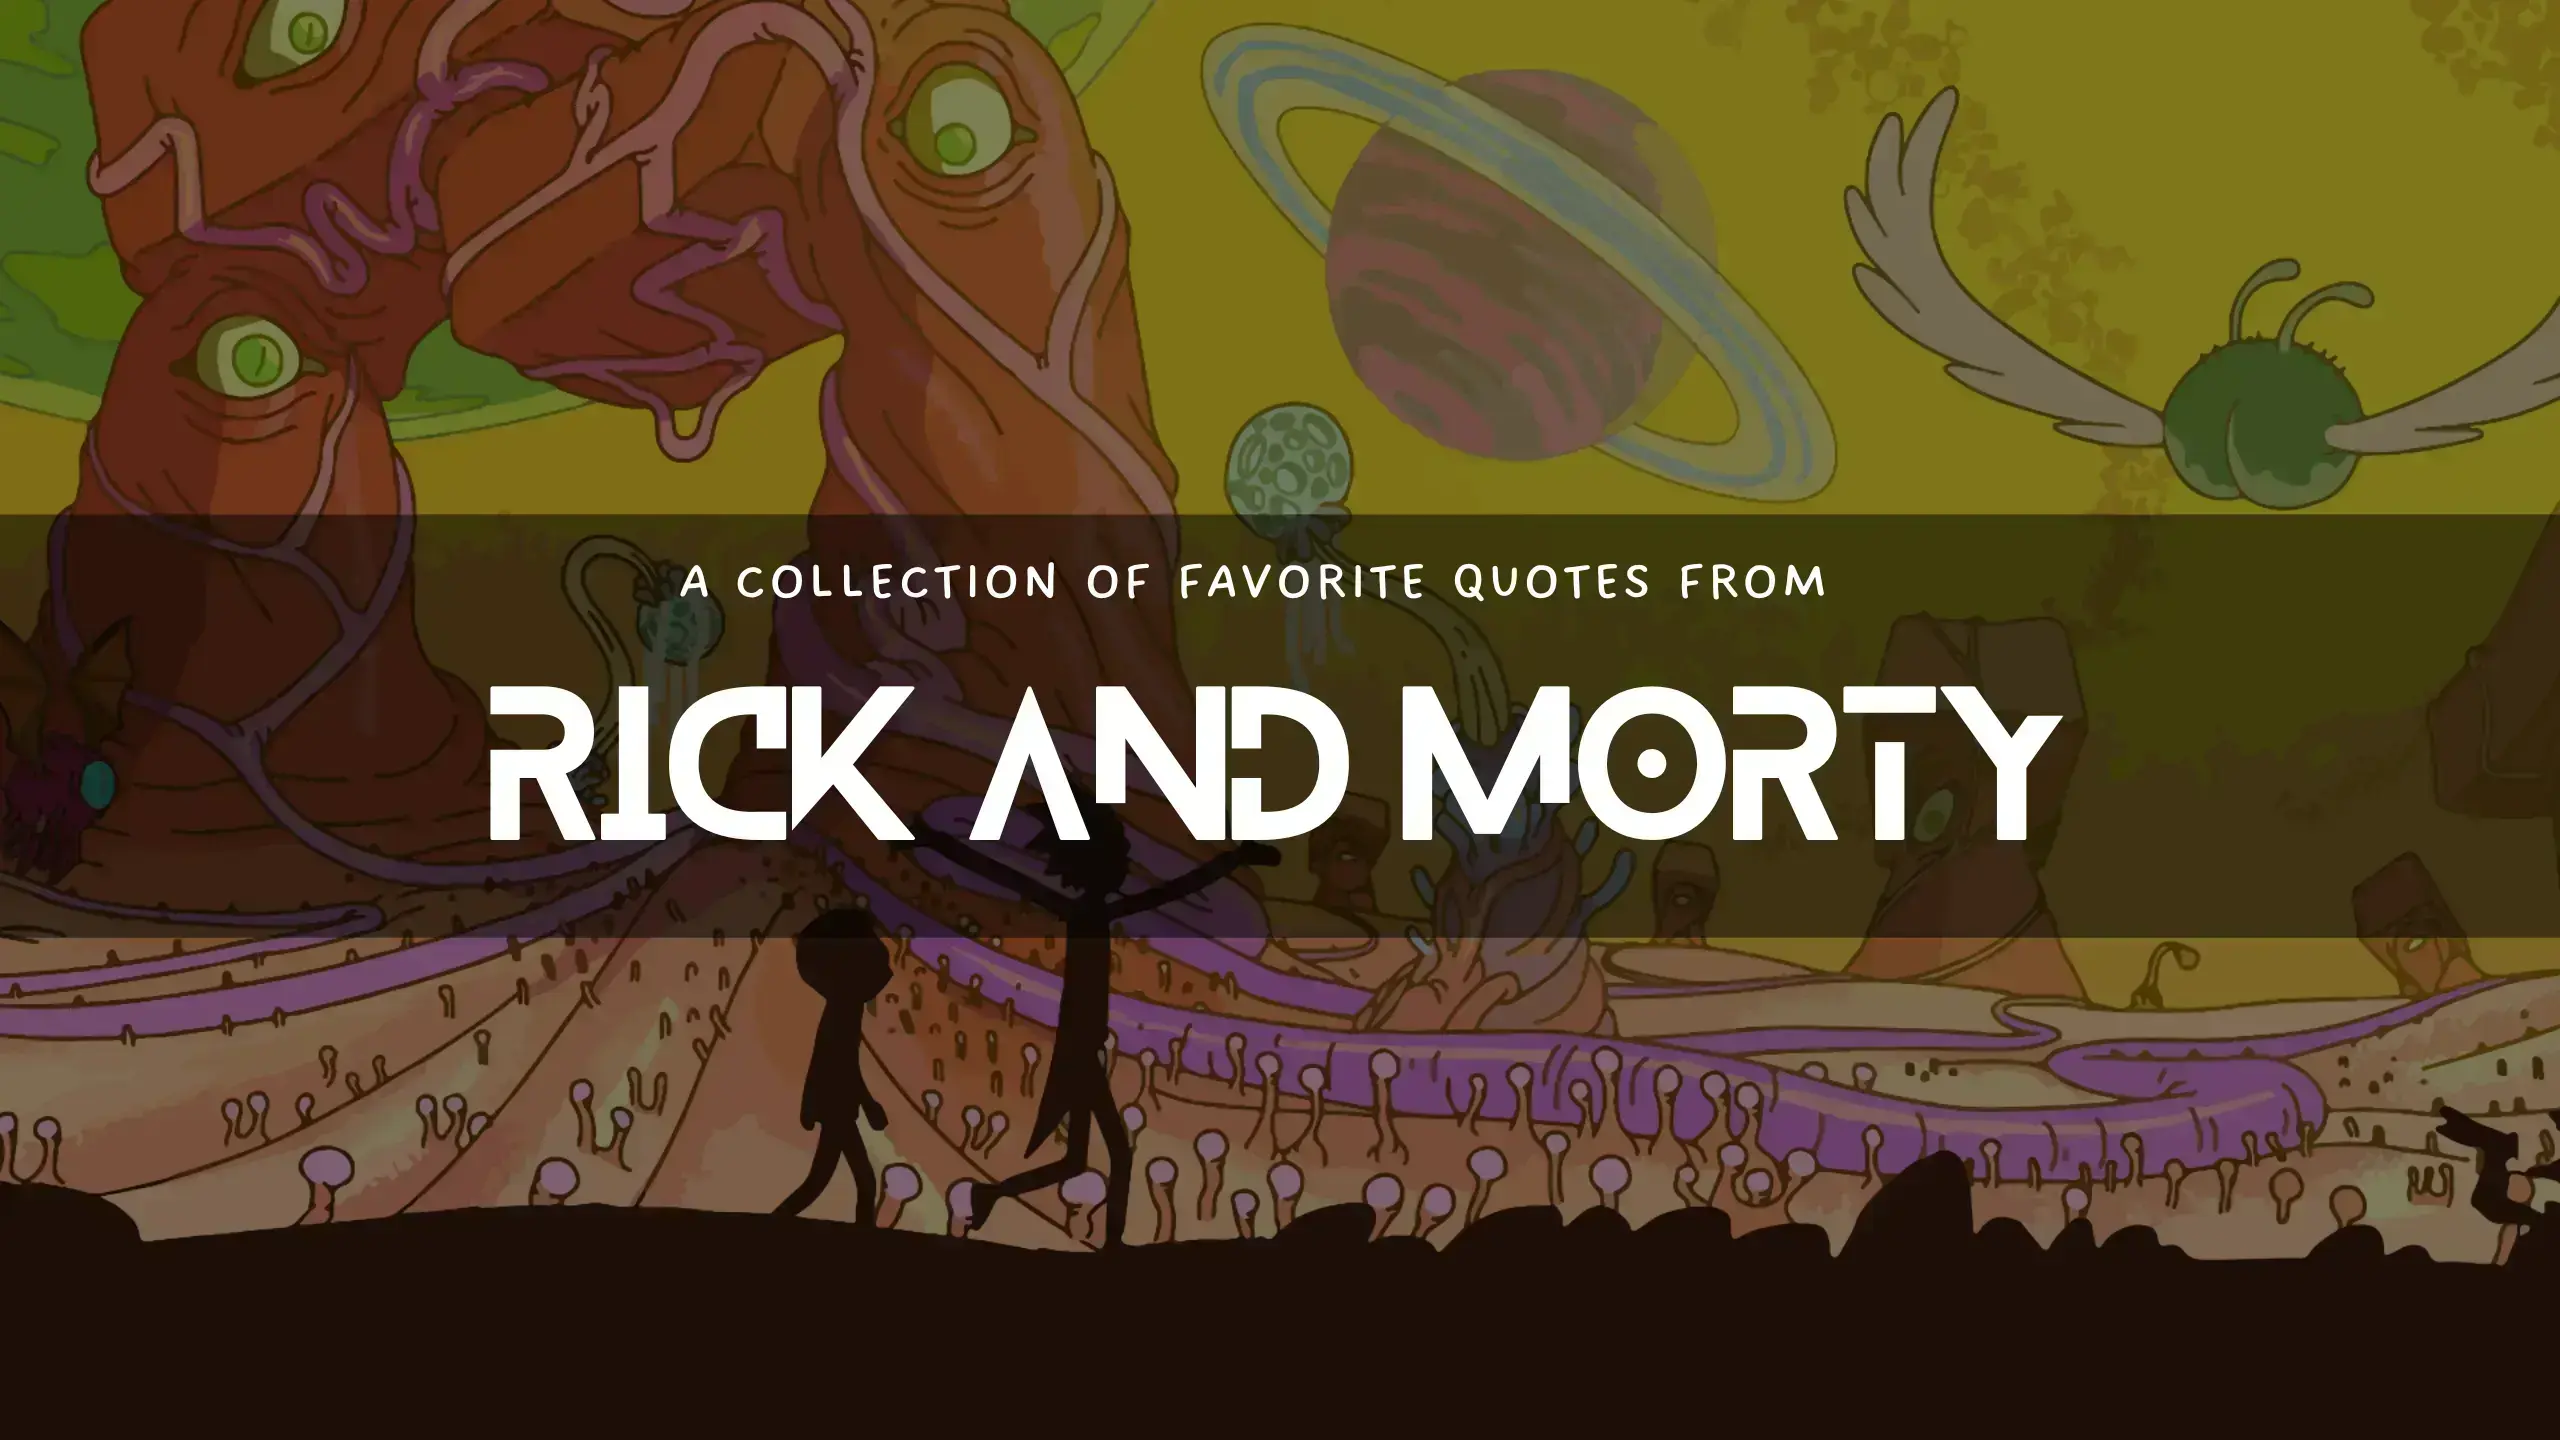 Awesome quotes from Rick and Morty